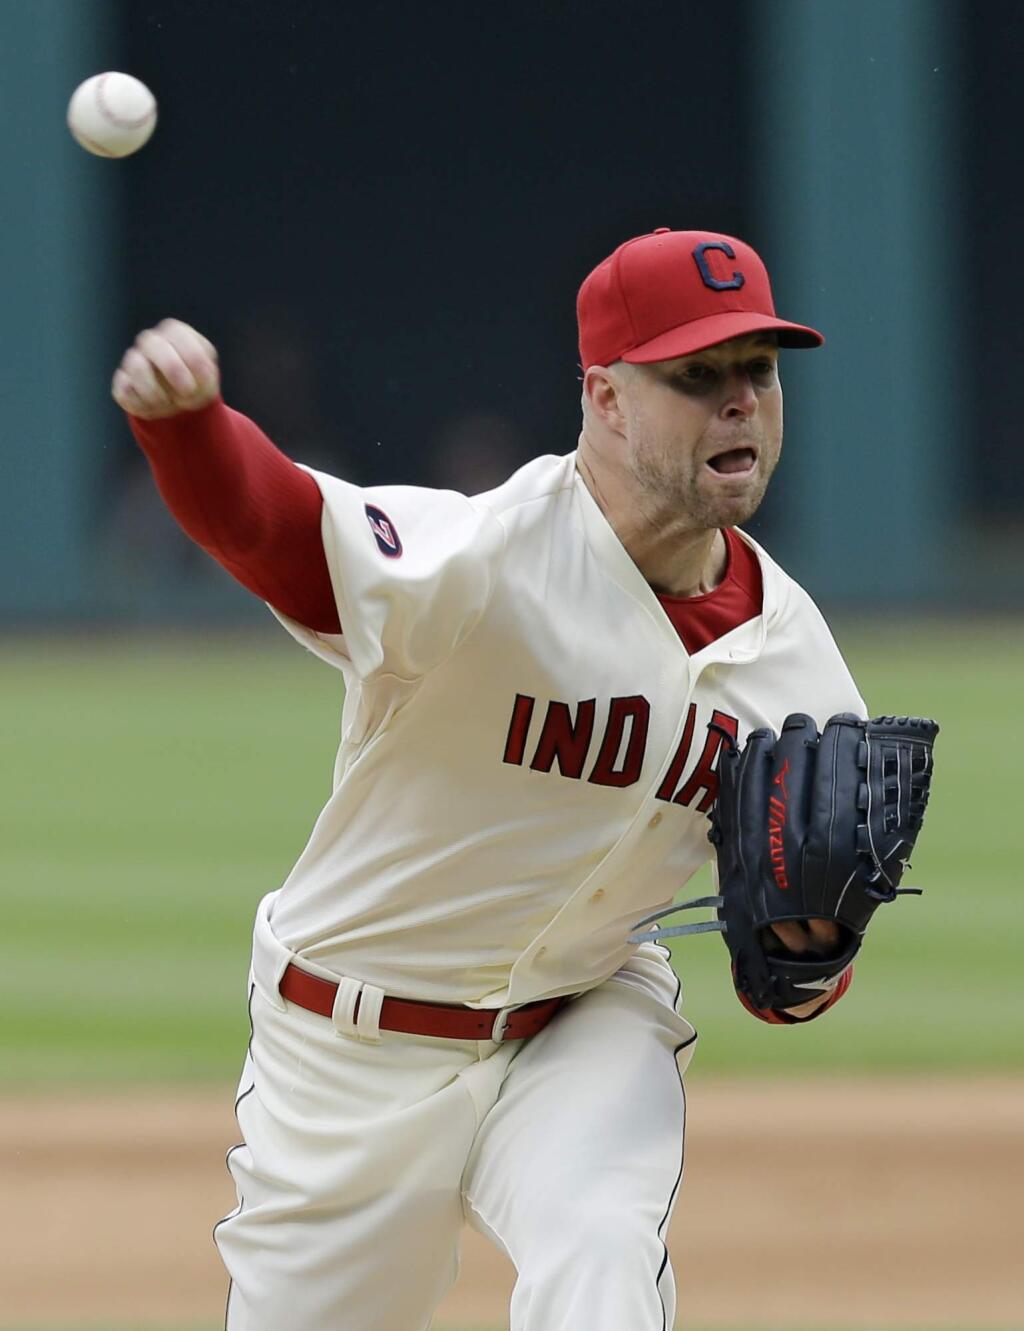 Cleveland Indians starting pitcher Corey Kluber delivers in the first inning of a baseball game against the Oakland Athletics, Sunday, July 12, 2015, in Cleveland. (AP Photo/Tony Dejak)